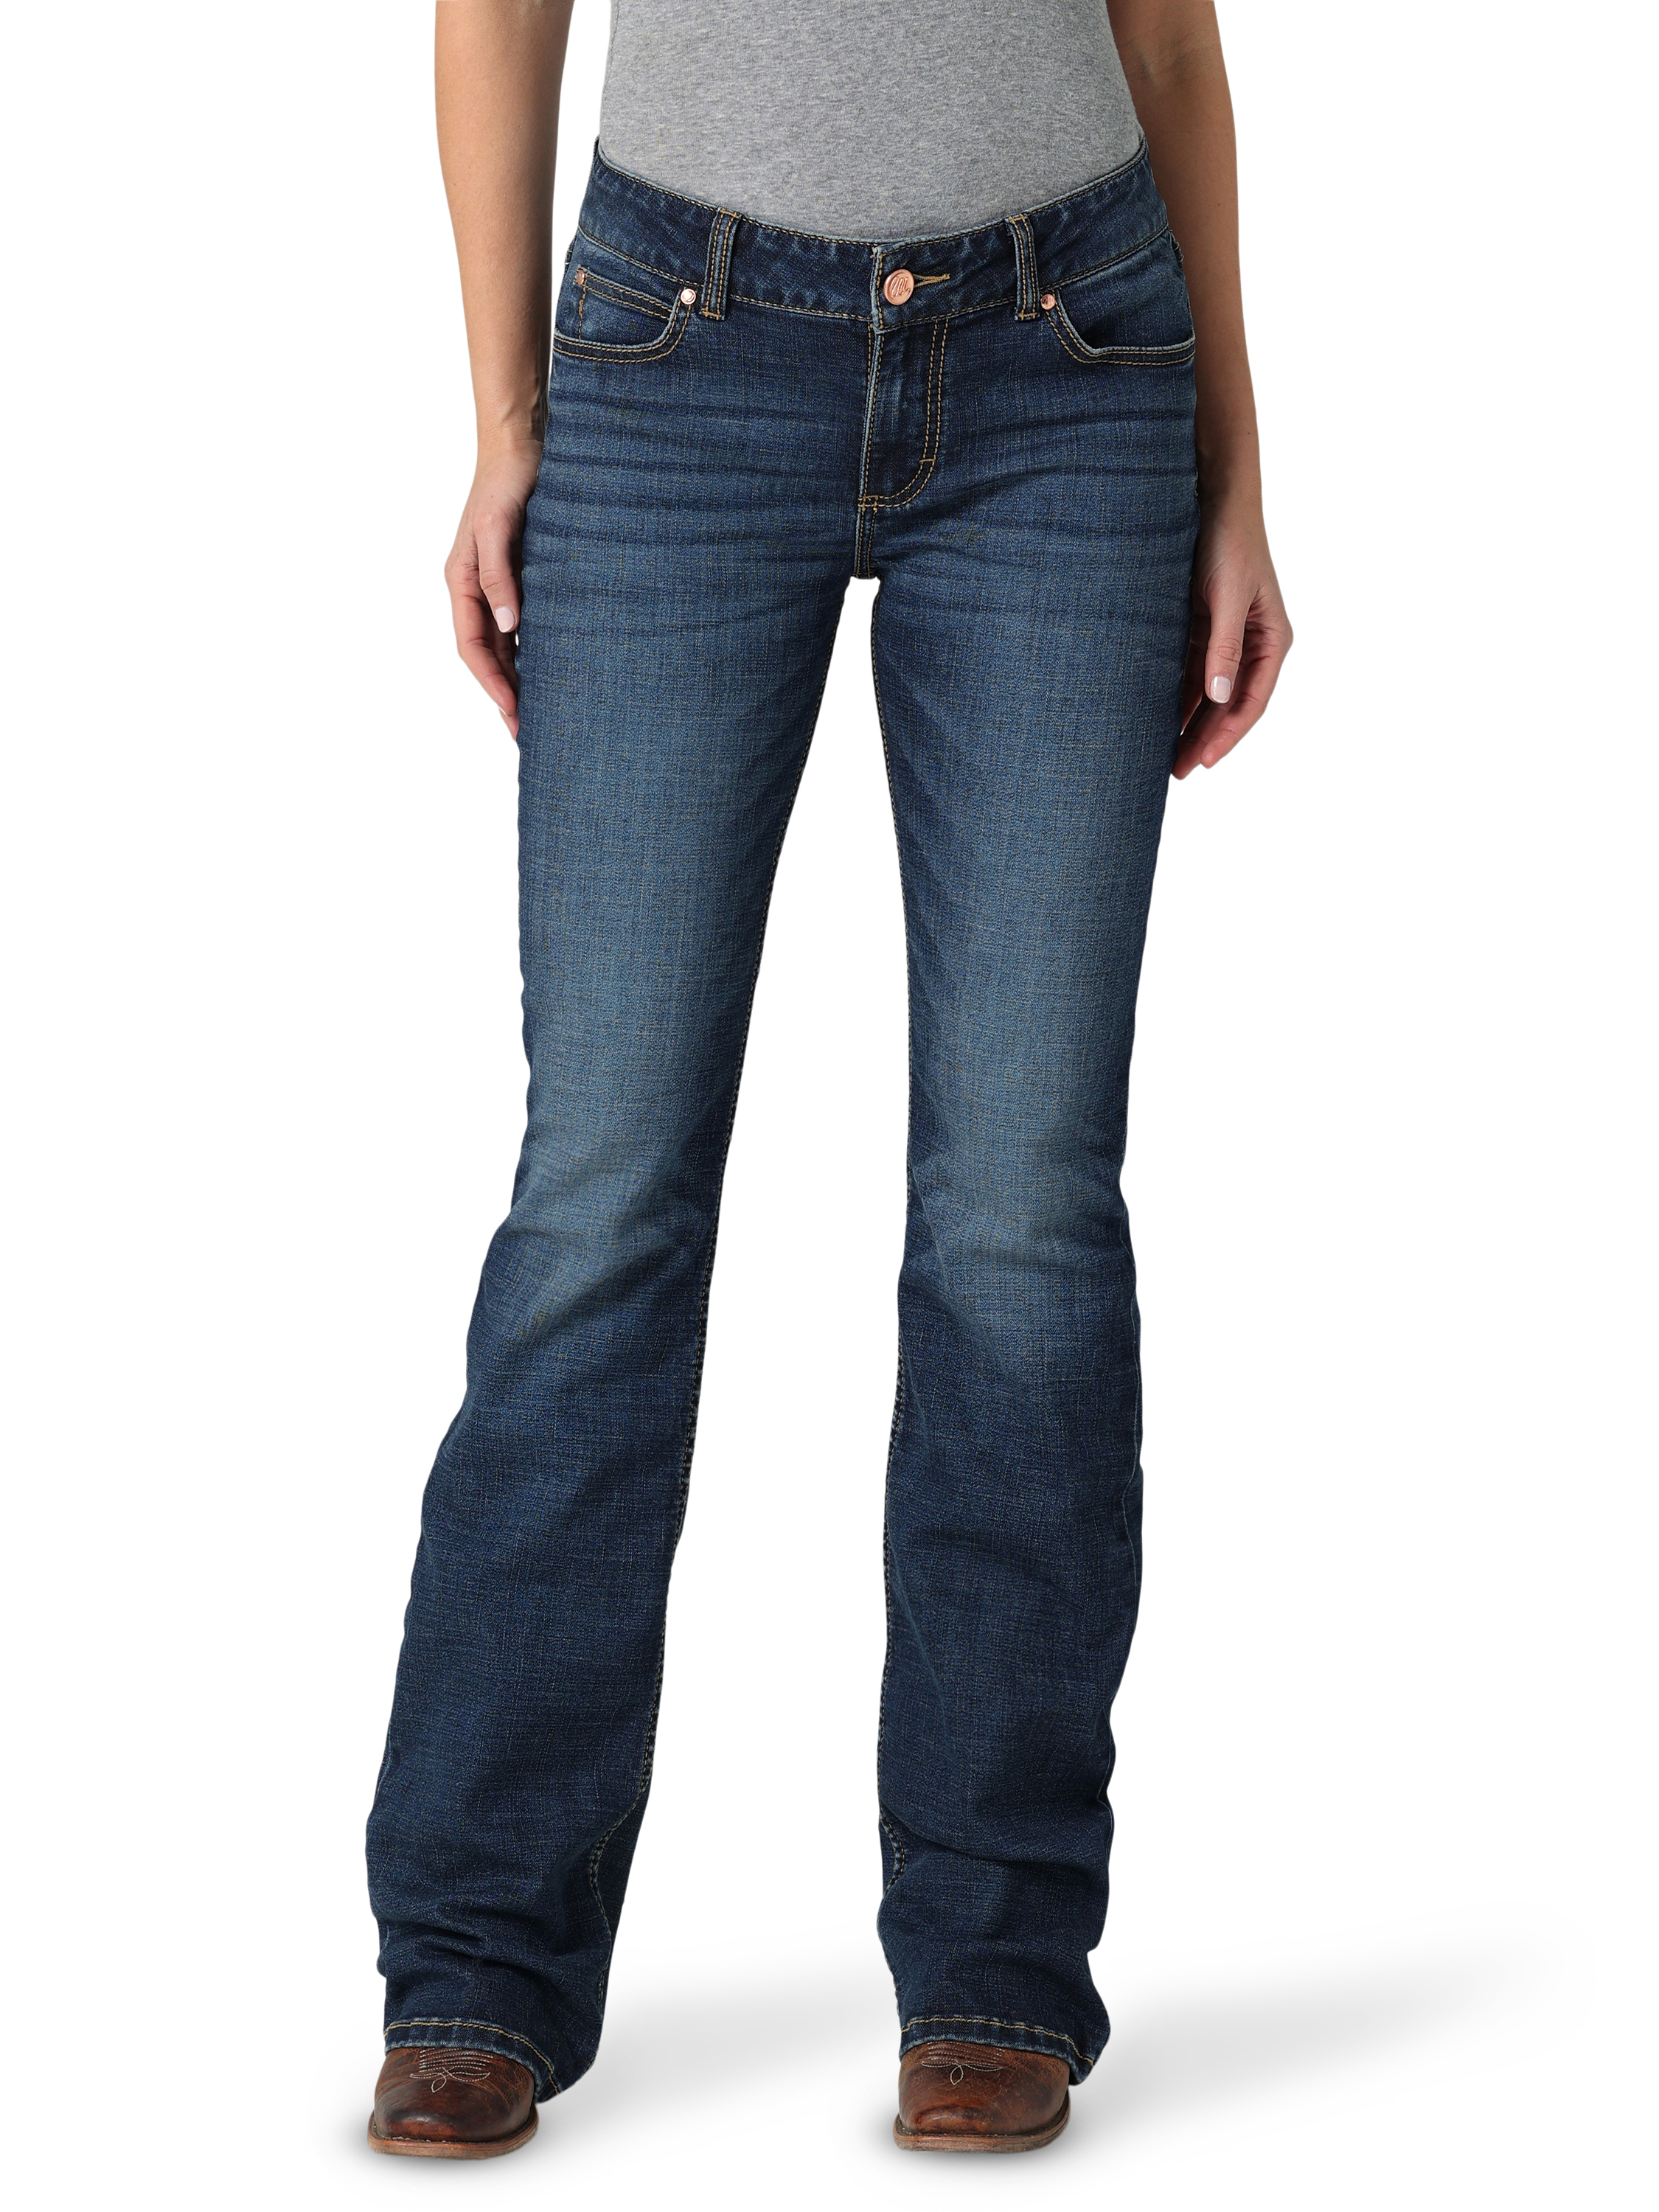 Wrangler® Women's Retro Mae Bootcut Jean with Stretch Fabric - image 1 of 6